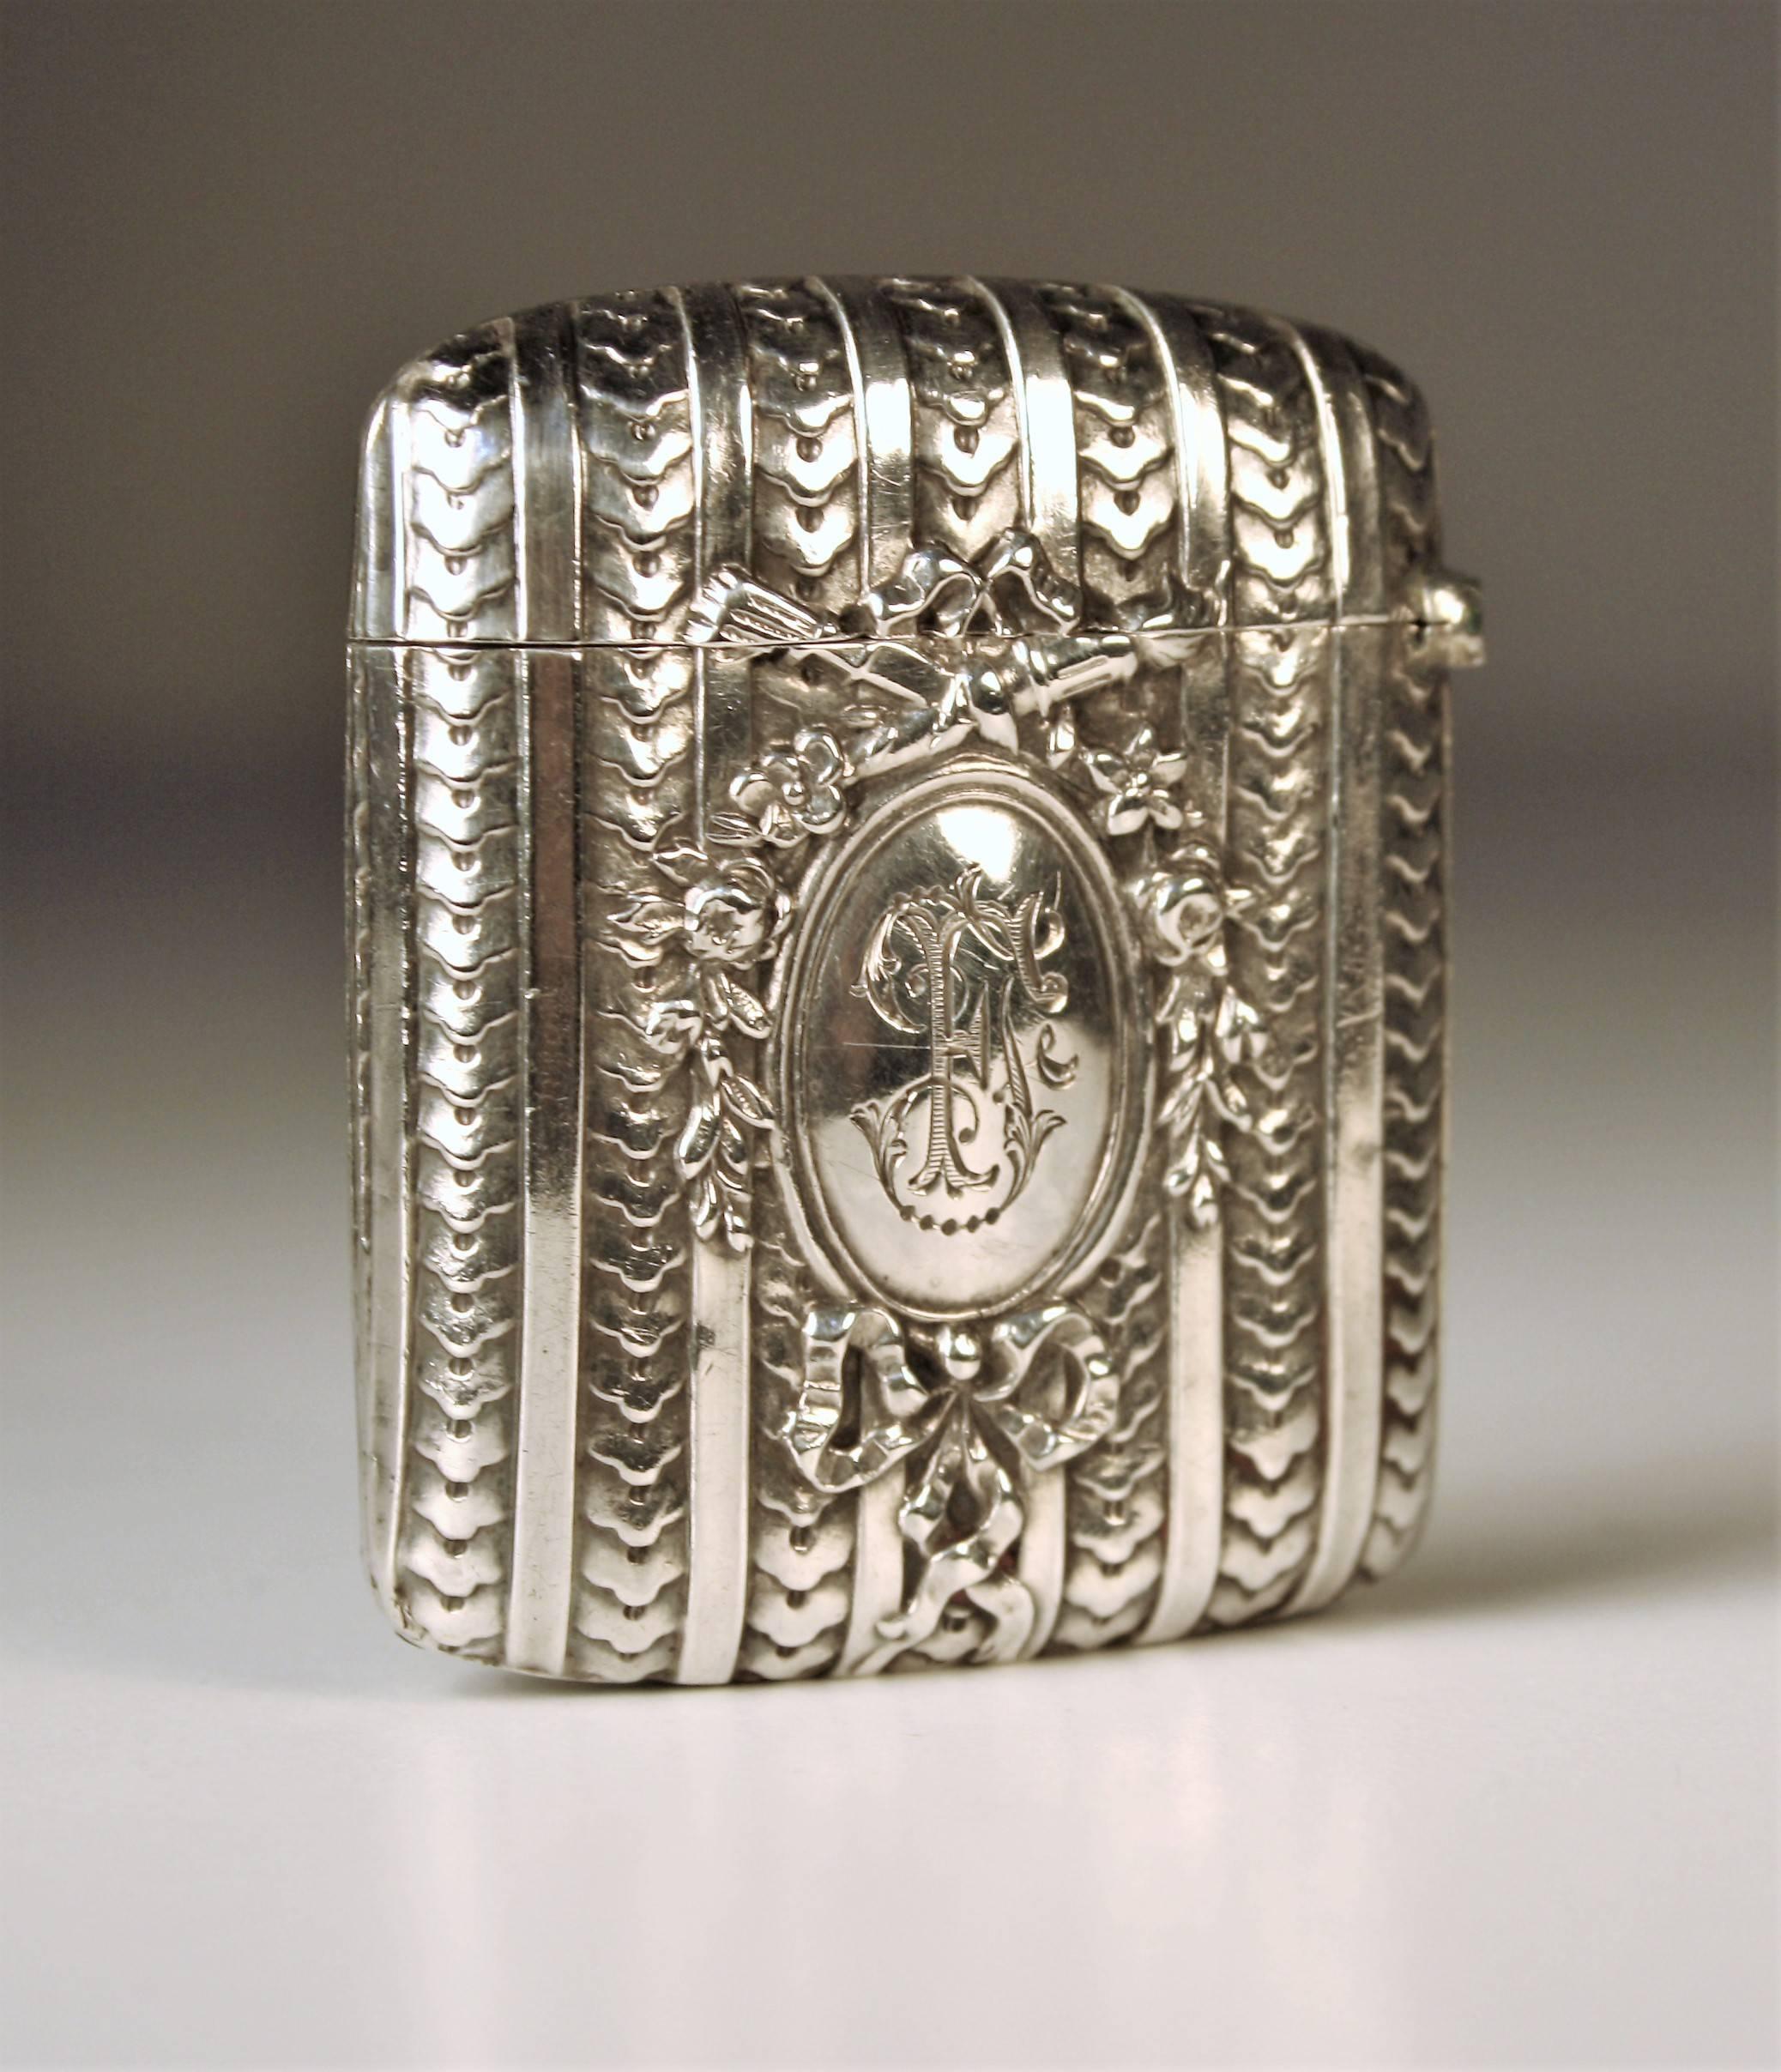 French neoclassical Vesta case of the late 19th century.
Very finely chiselled sterling silver in Louis XVI Style with monogram in a medallion.